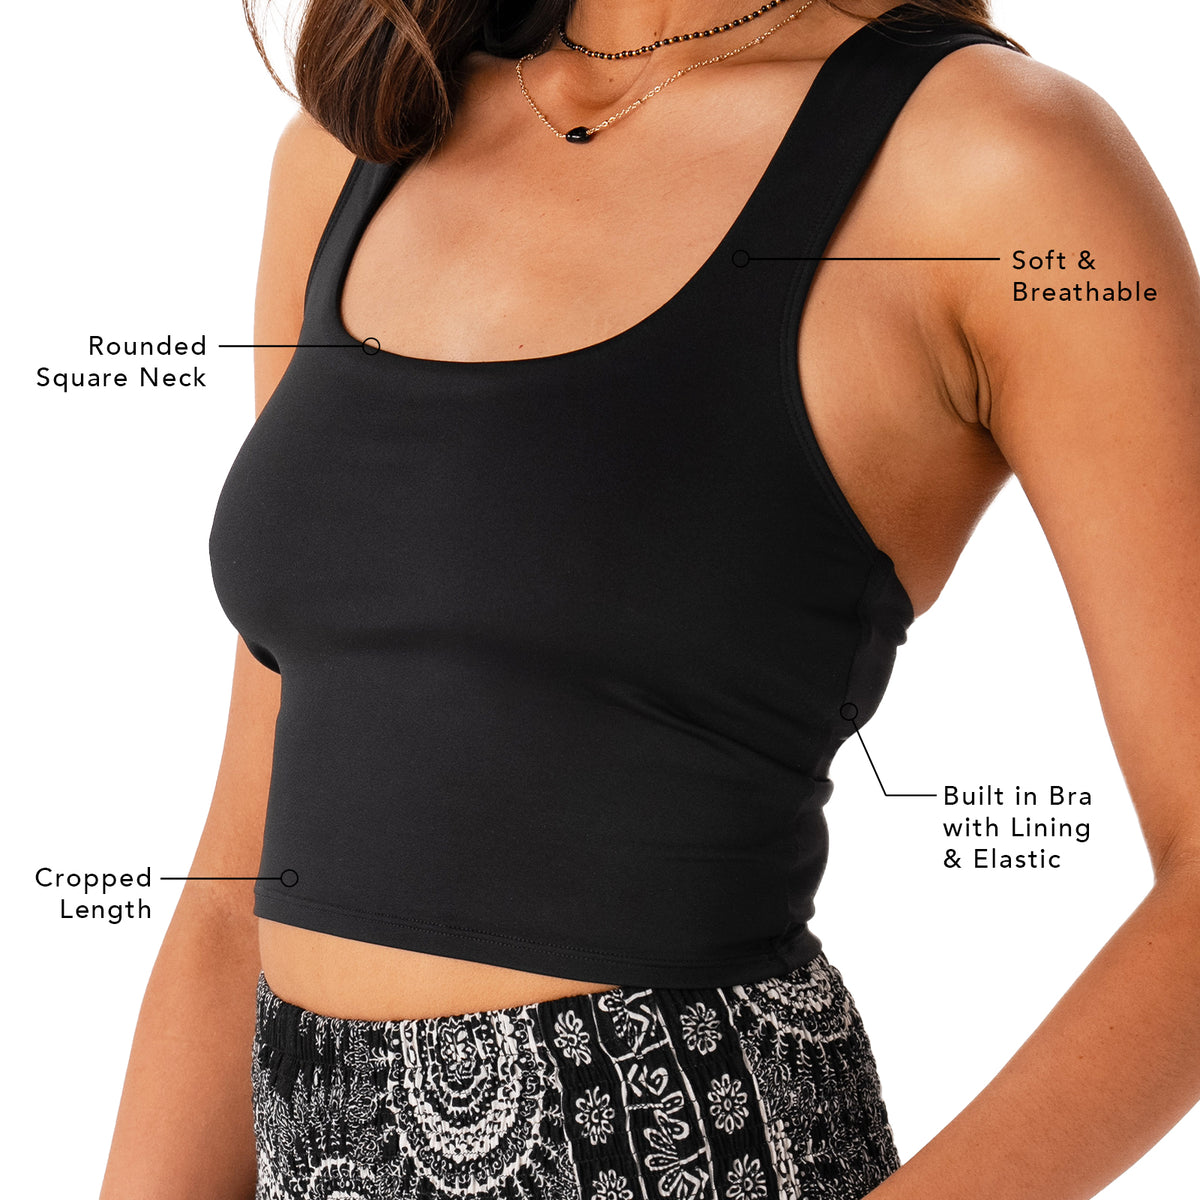 Model wearing a black athleisure tank top. Photo points out several features, including the cropped length, built in bra with lining and elastic, soft and breathable fabric and a rounded square neck